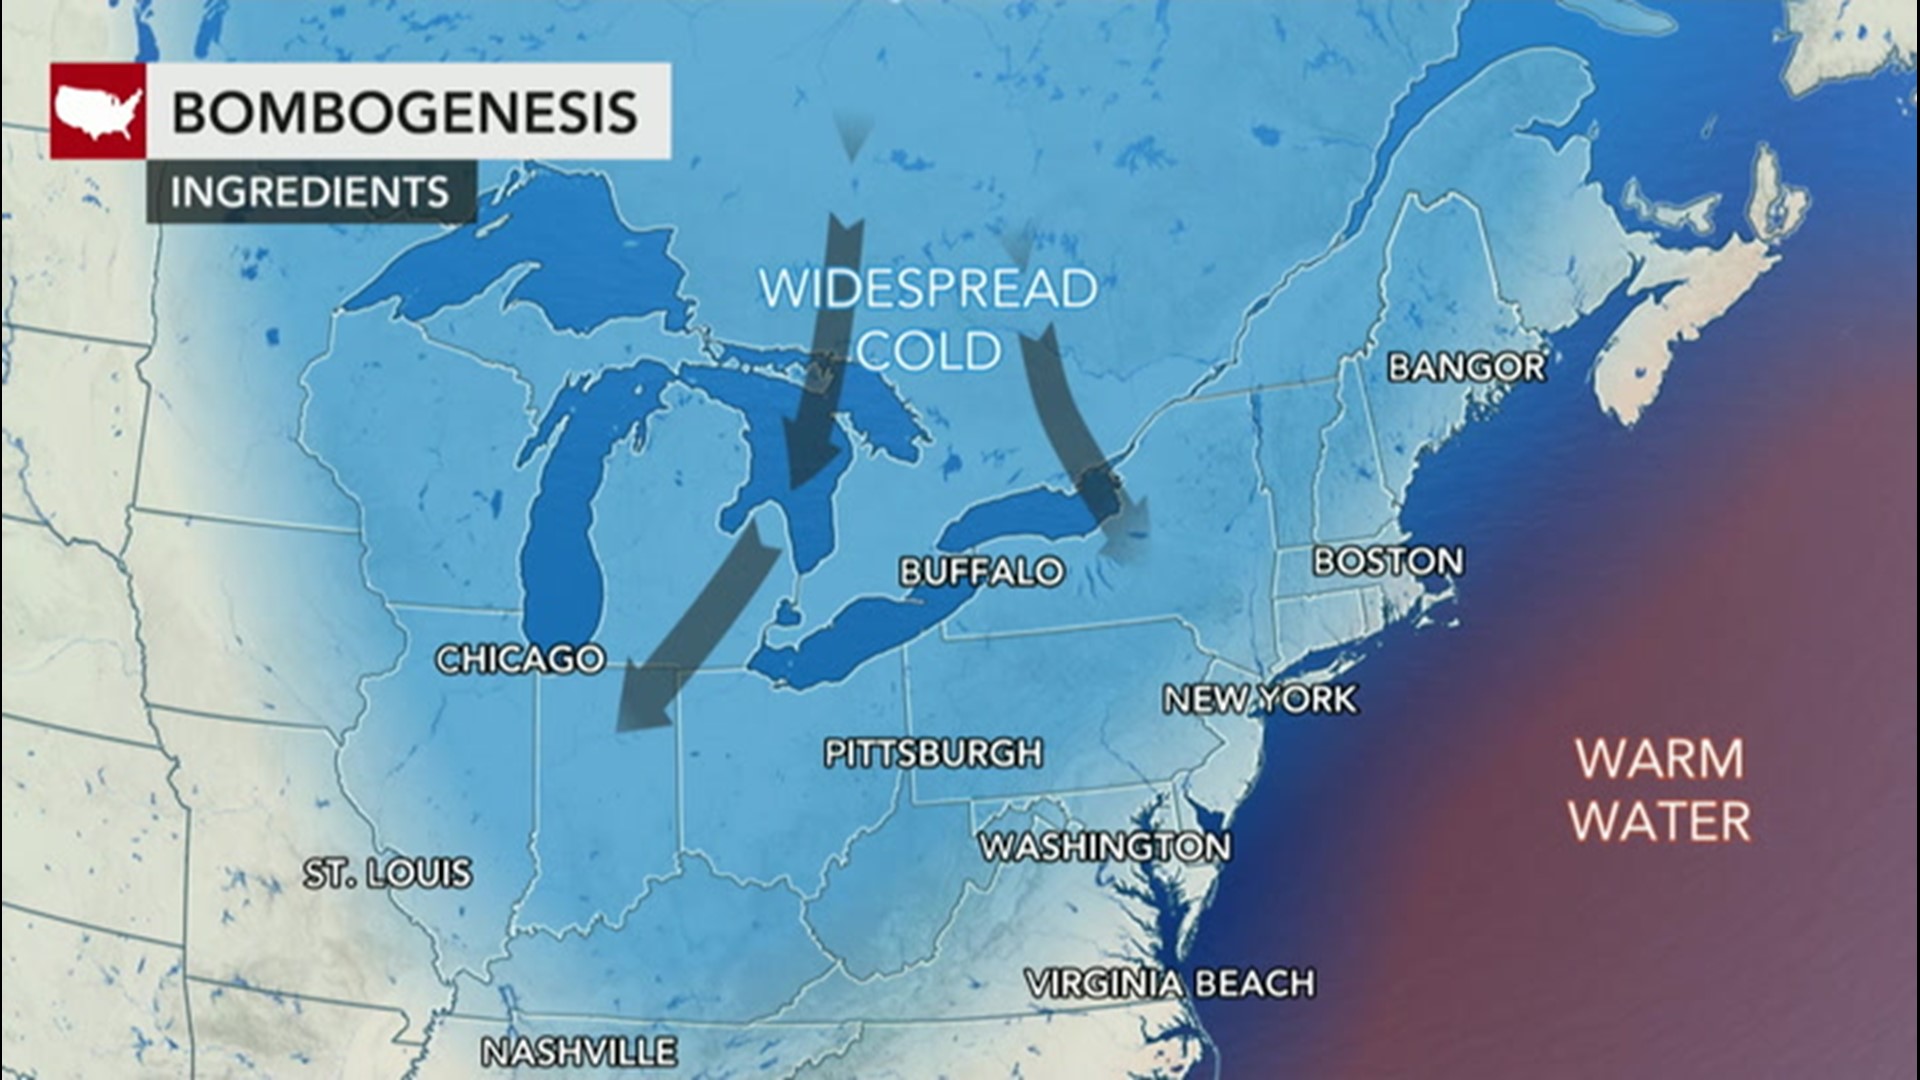 As some intense weather bears down on the Northeast, AccuWeather's Chief Broadcast Meteorologist explains how the weather system will likely result in a bomb cyclone.